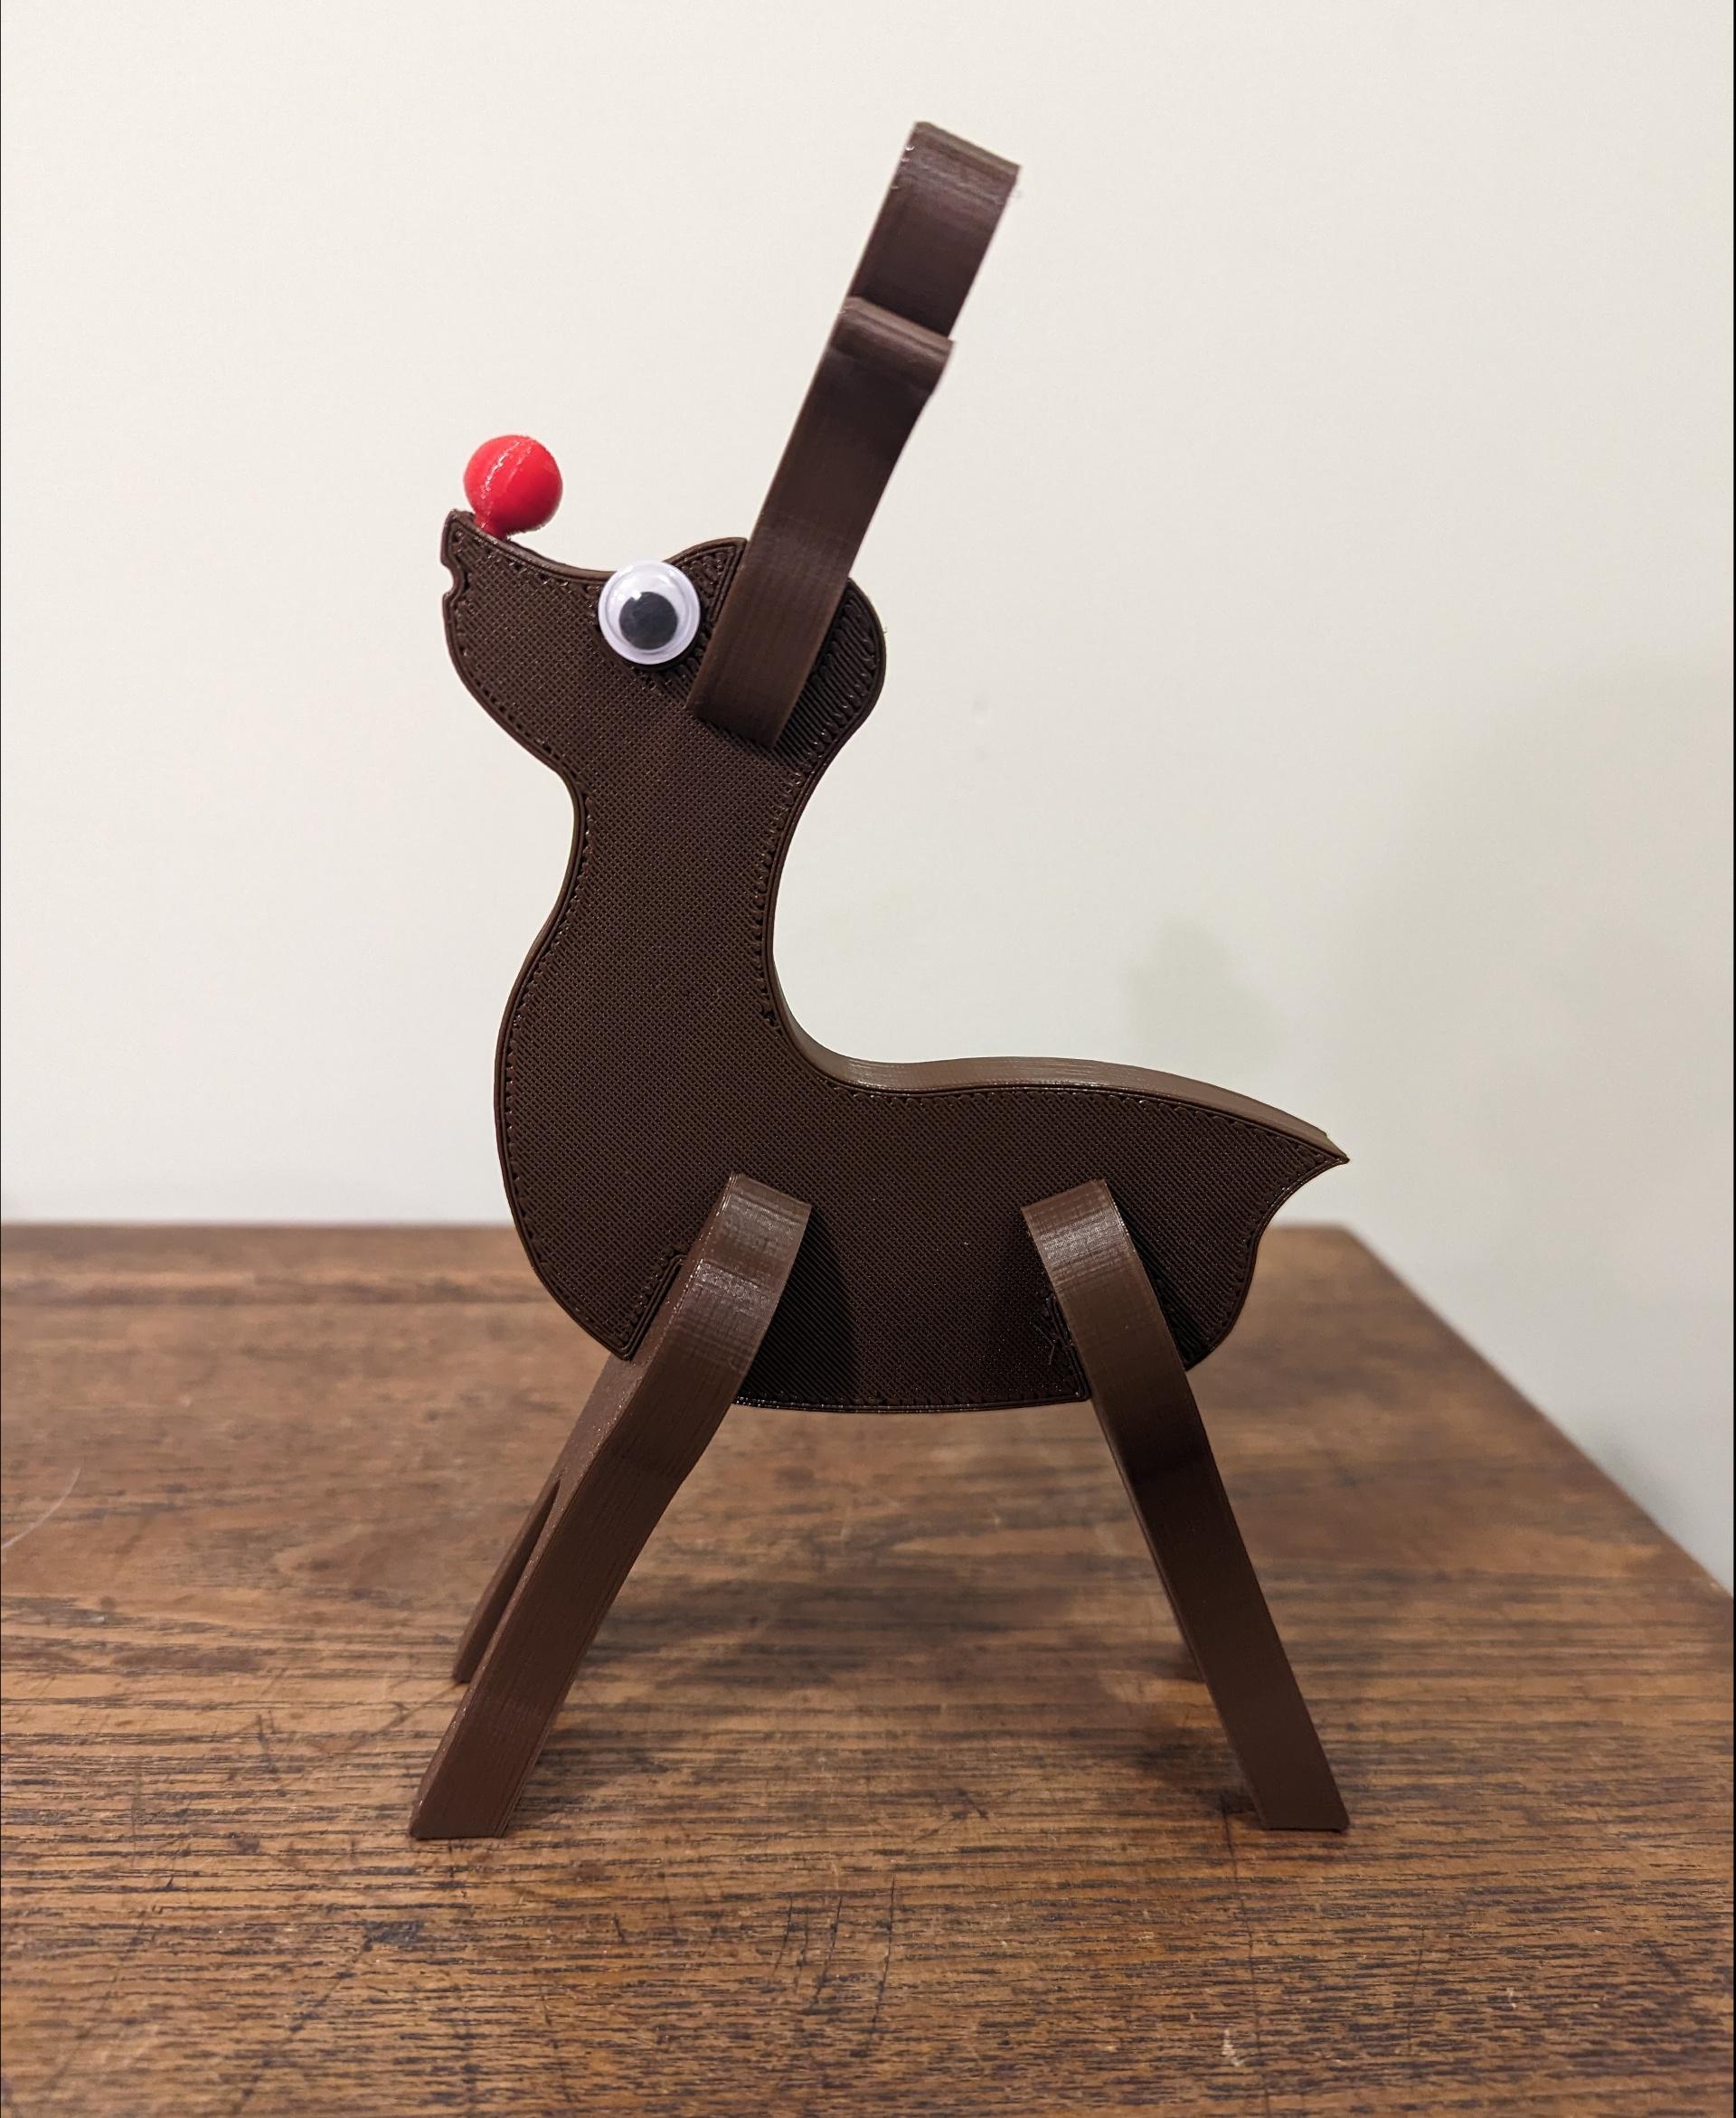 Reindeer Wood Cut Kit - @PrintedSolid Tree Brown
@GizmoDorks White
@prusament Lipstick Red

and googly eyes - 3d model